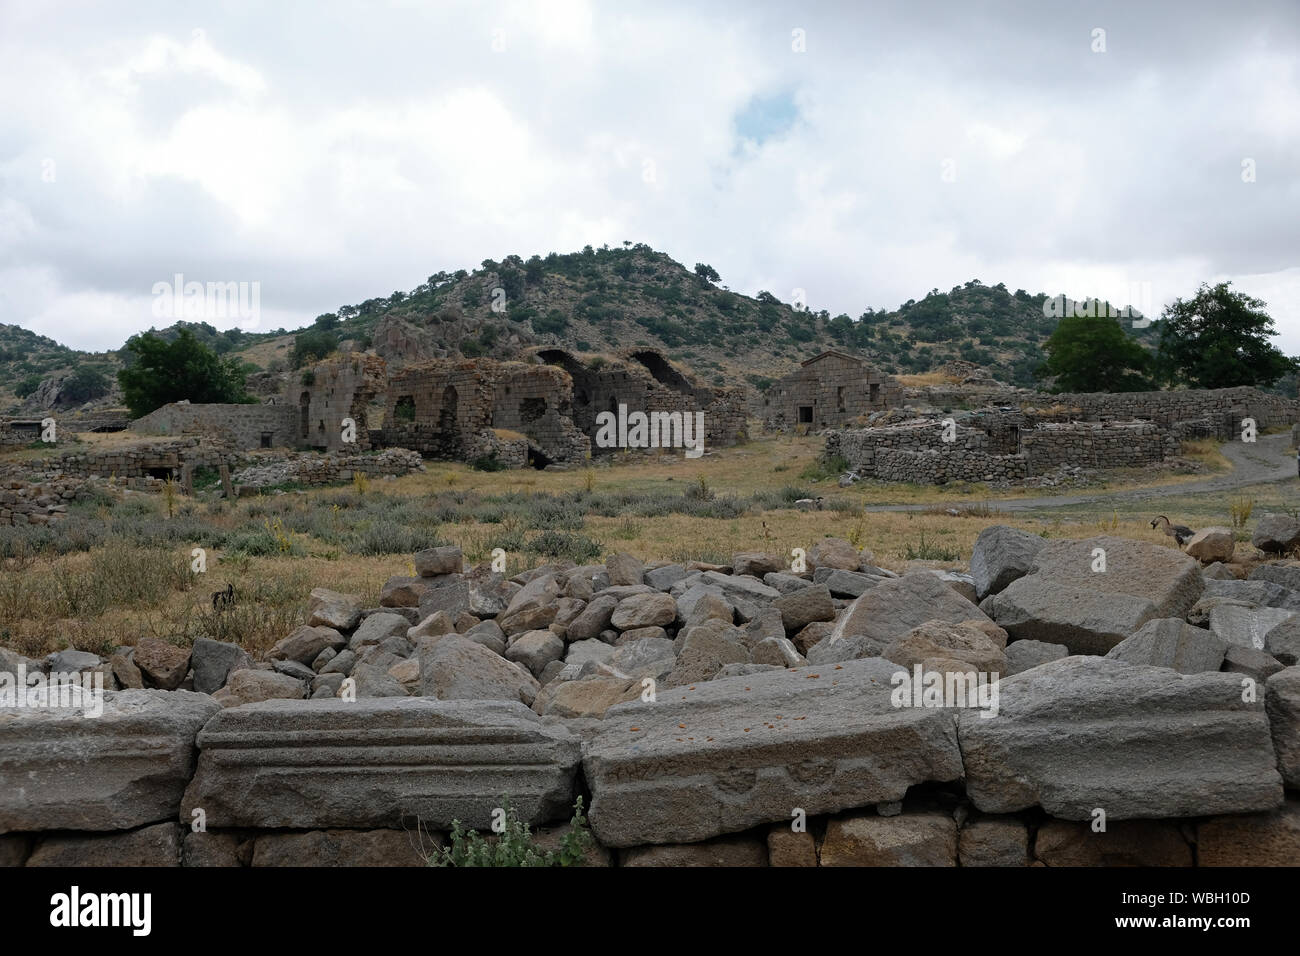 The ruins of some Byzantine buildings can be seen in Degle Orenyeri, a volcanic mountain in the north of Karaman. Stock Photo